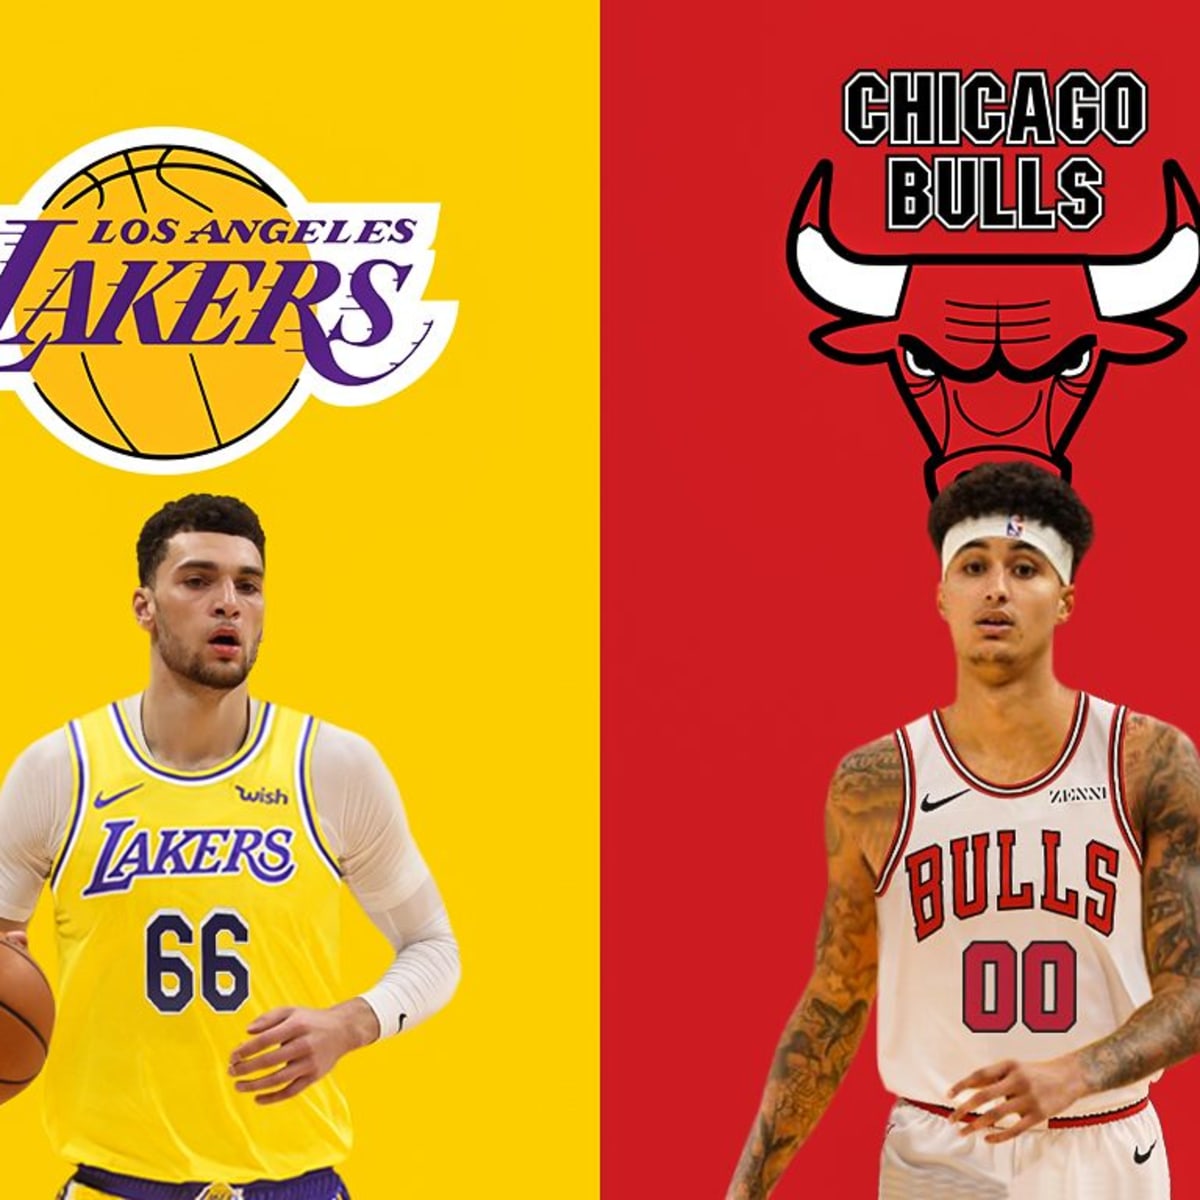 Basketball Forever - The Lakers could potentially acquire Zach LaVine in a  trade involving Kyle Kuzma, Danny Green, and others. (via Jonathan Kiernan)